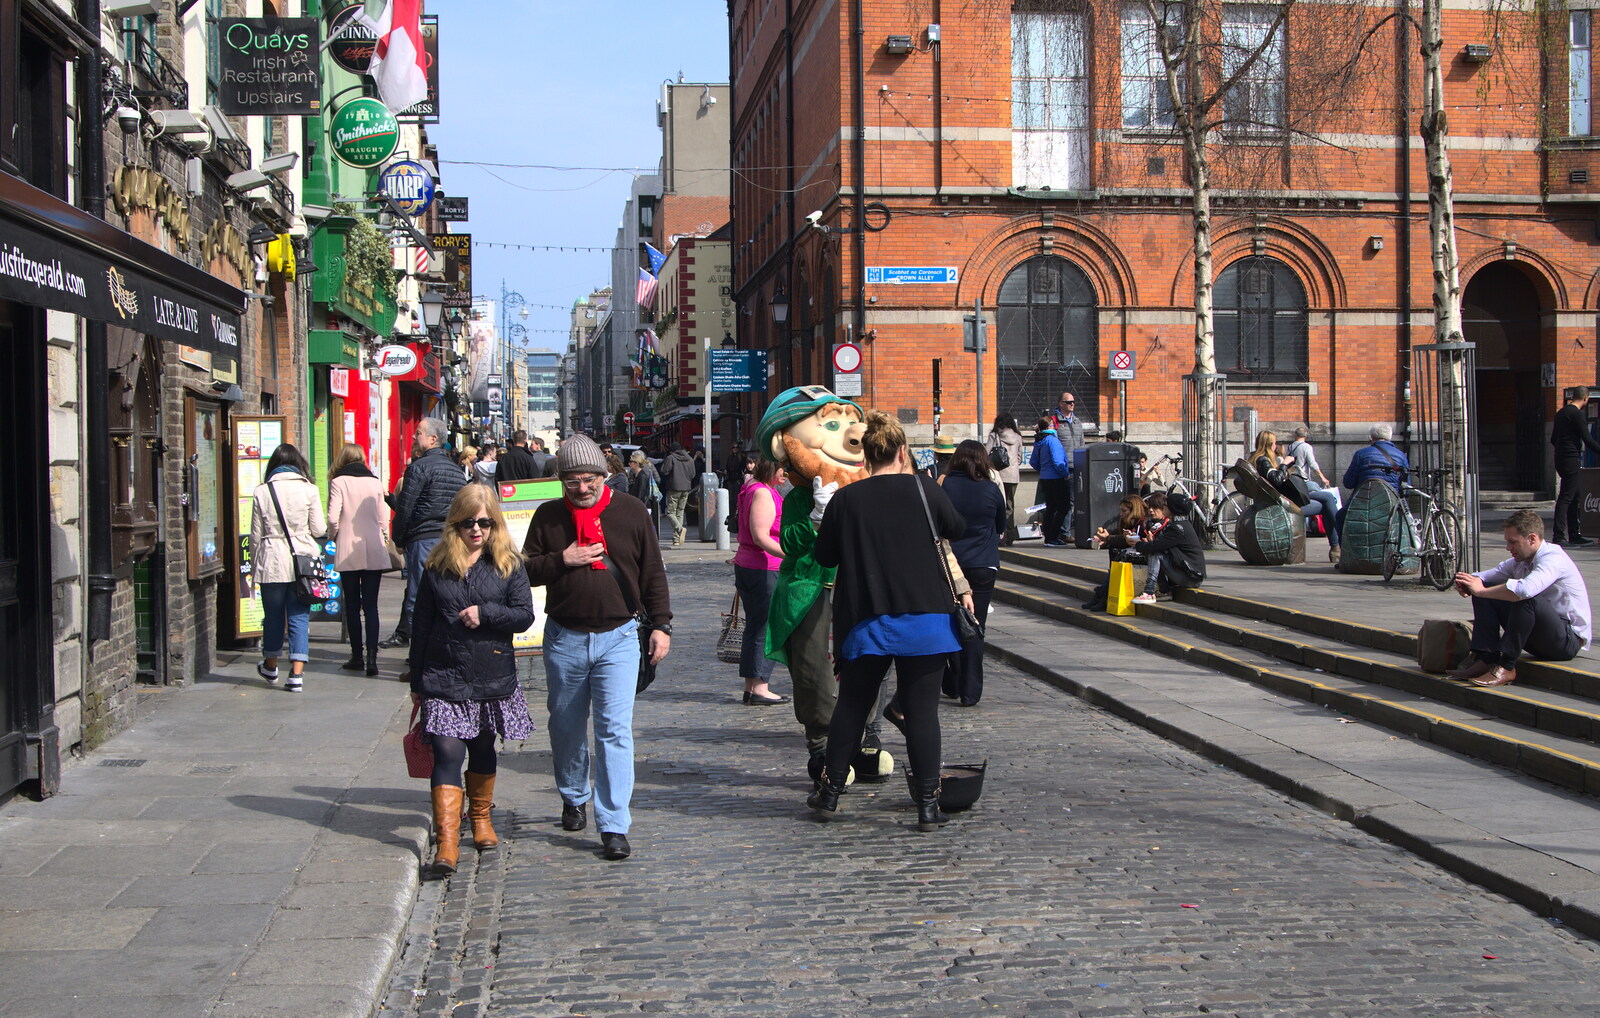 A giant Leprechaun from Temple Bar and Dun Laoghaire, Dublin, Ireland - 16th April 2015